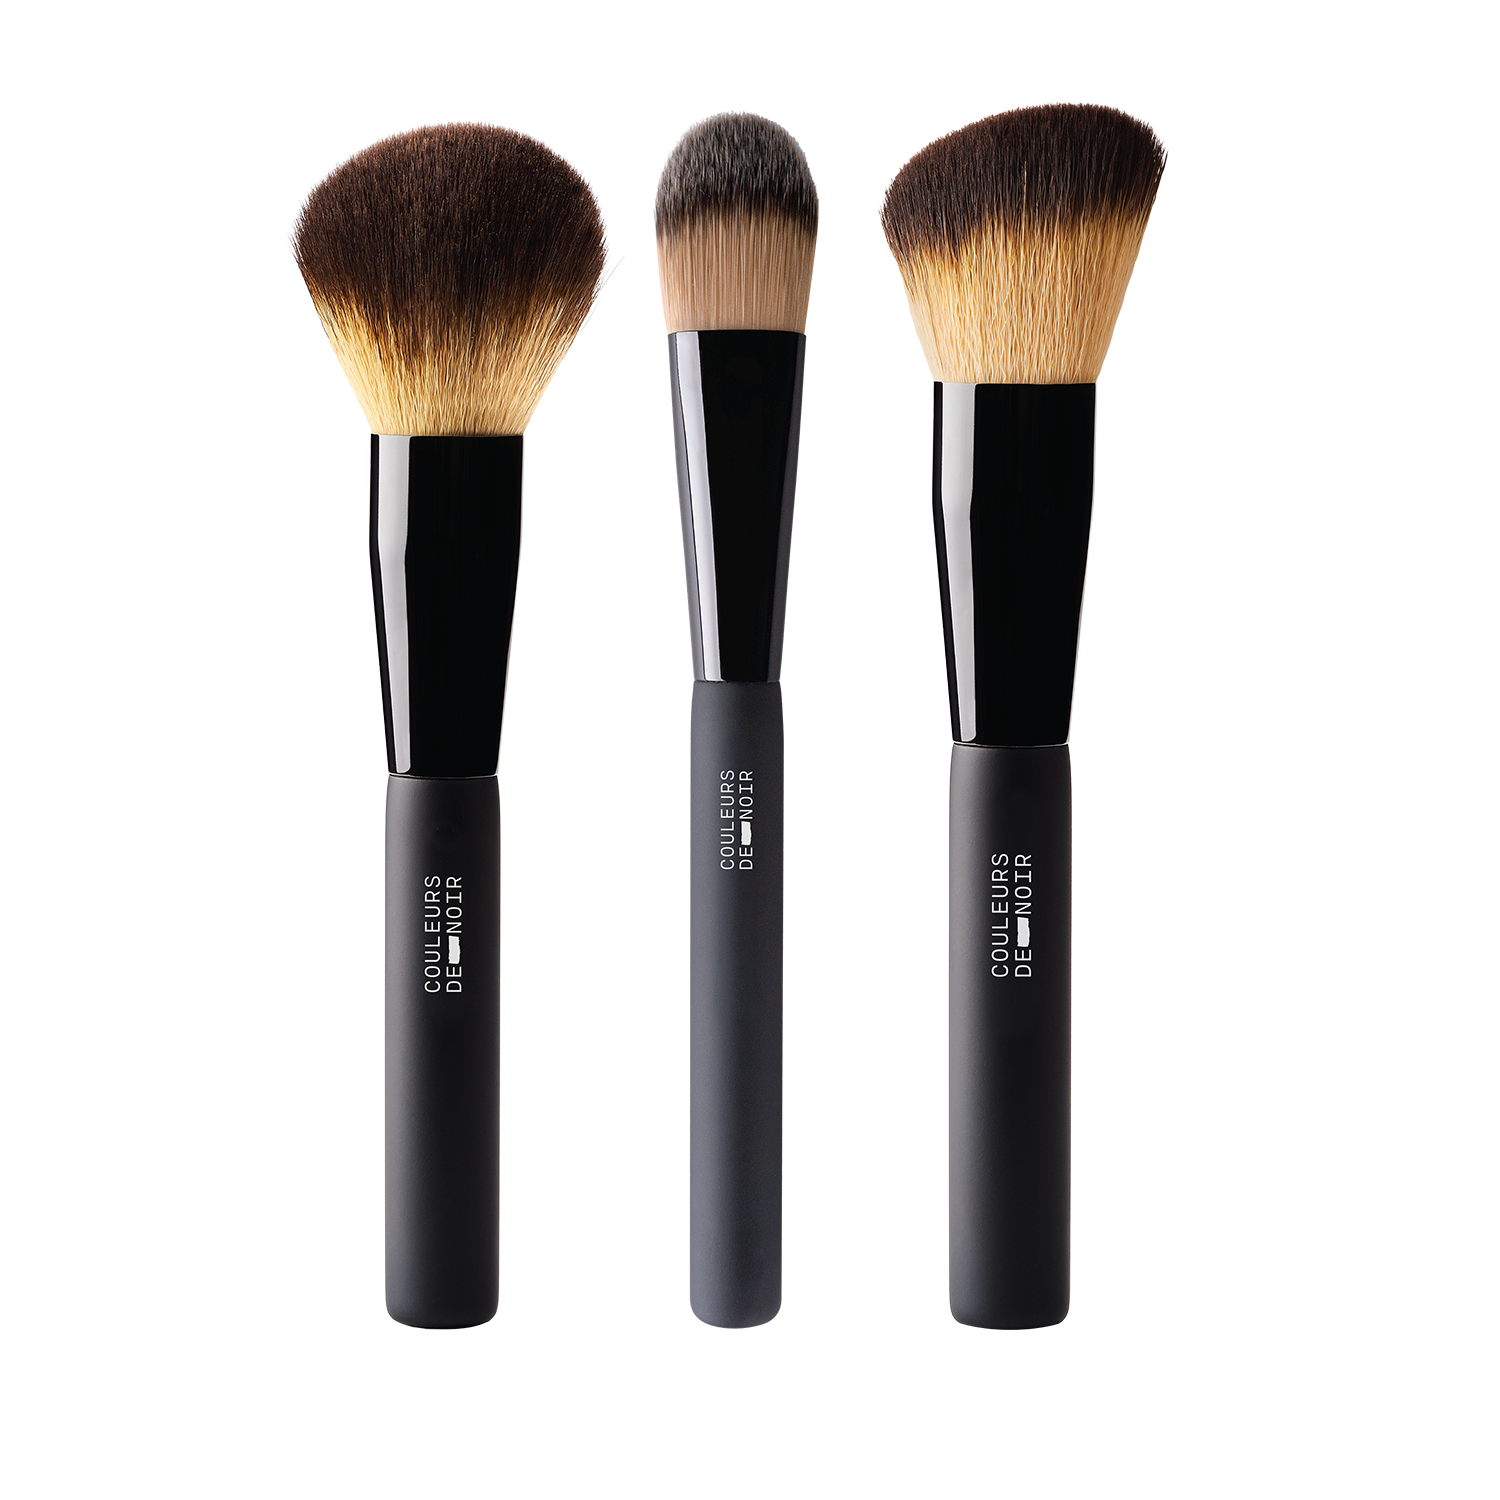 The Complexion Brush Set